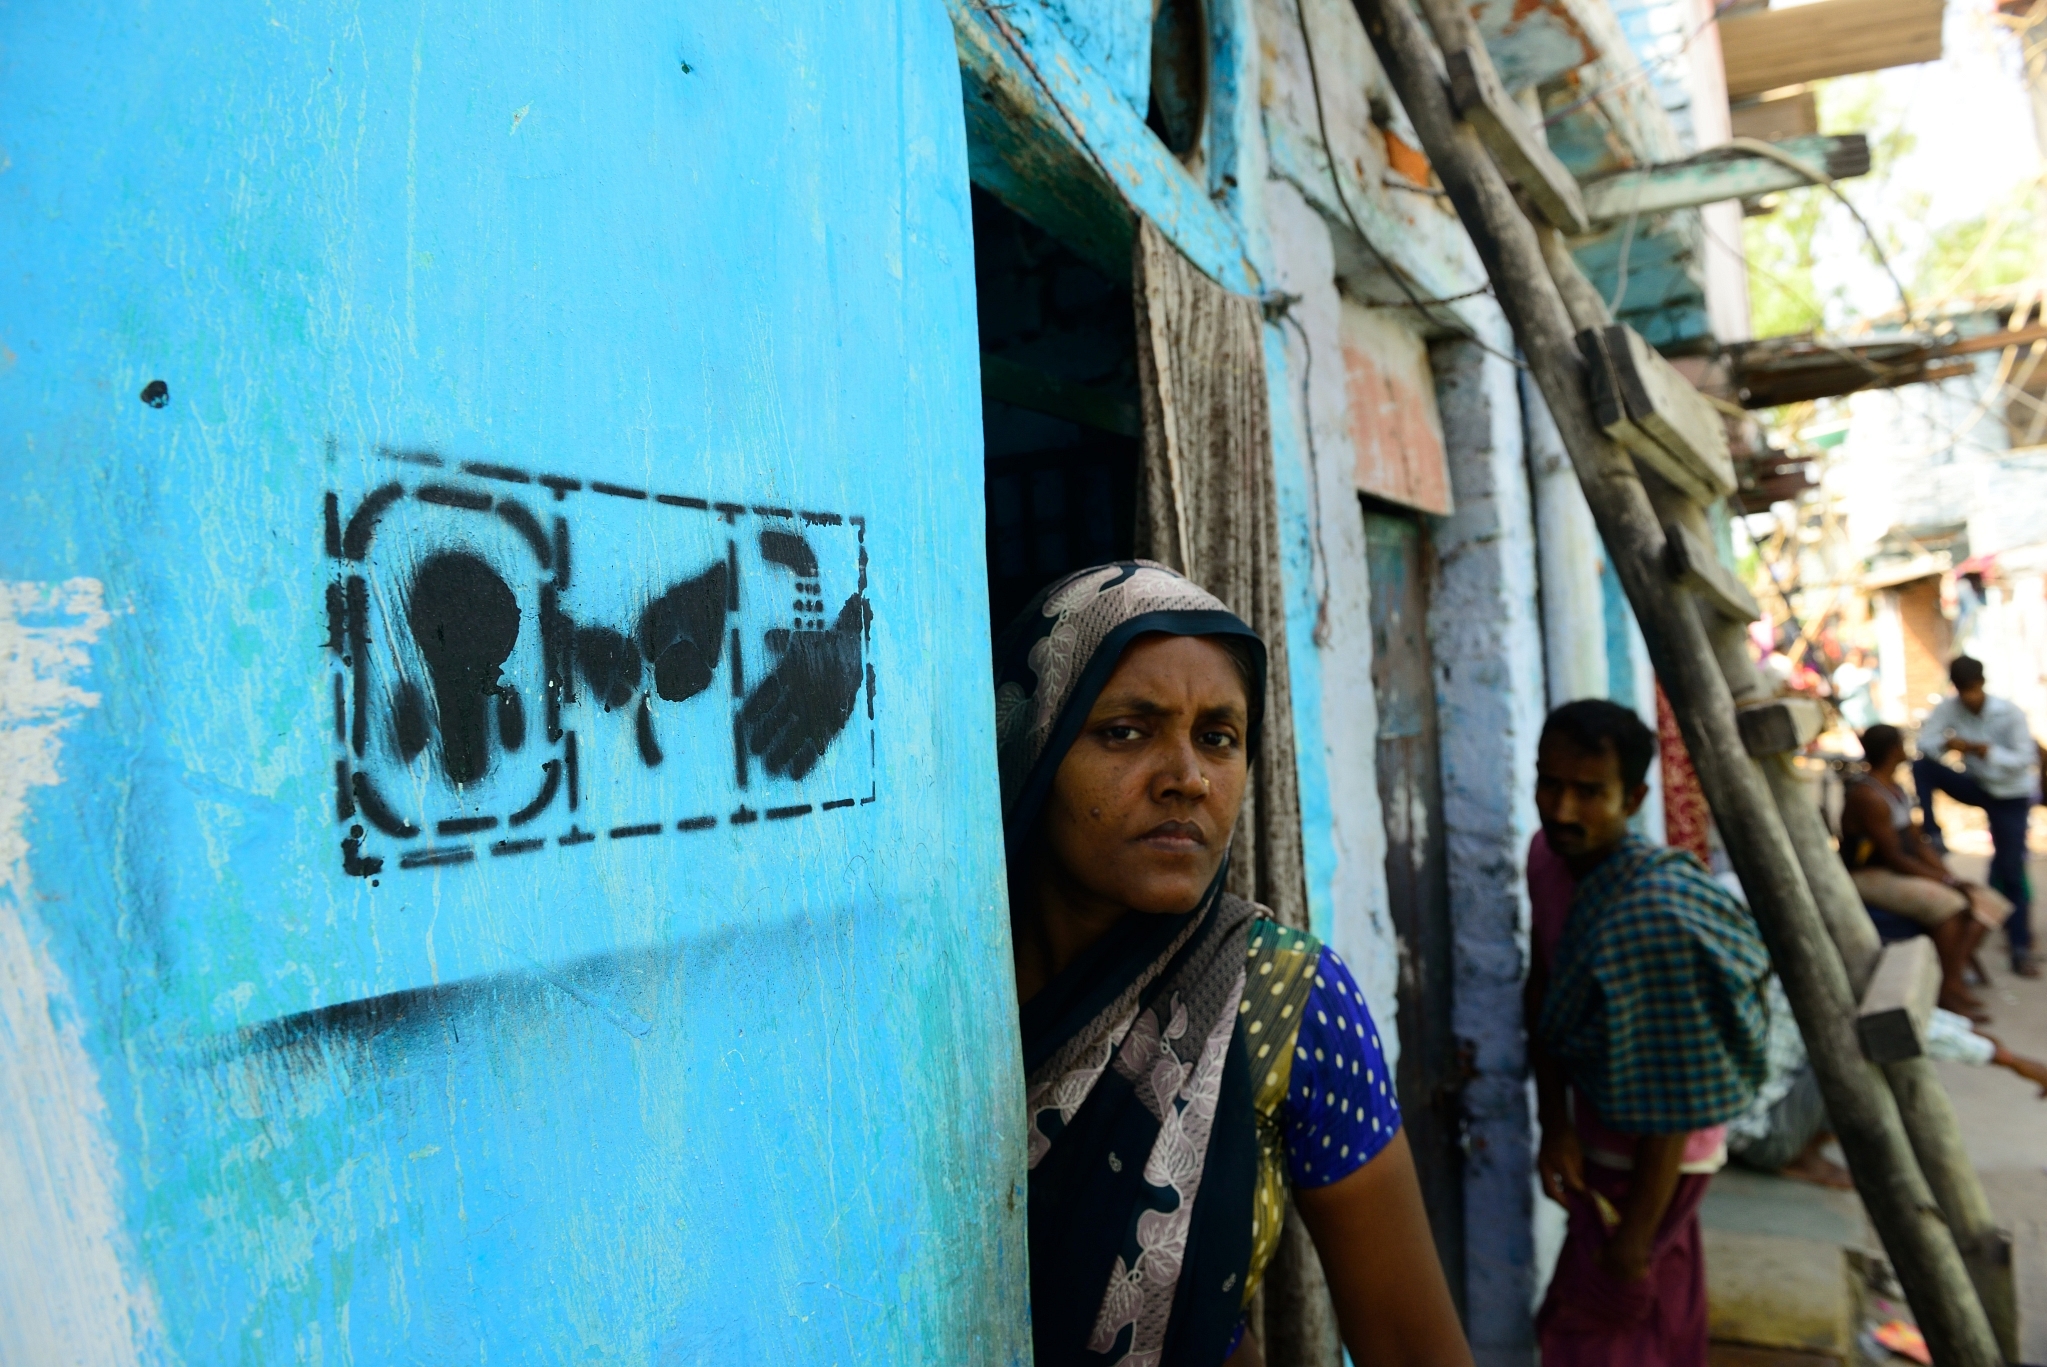 Toilet built under the ‘Swachh Bharat’ campaign launched by Prime Minister Narendra Modi. (Pradeep Gaur/Mint via Getty Images)